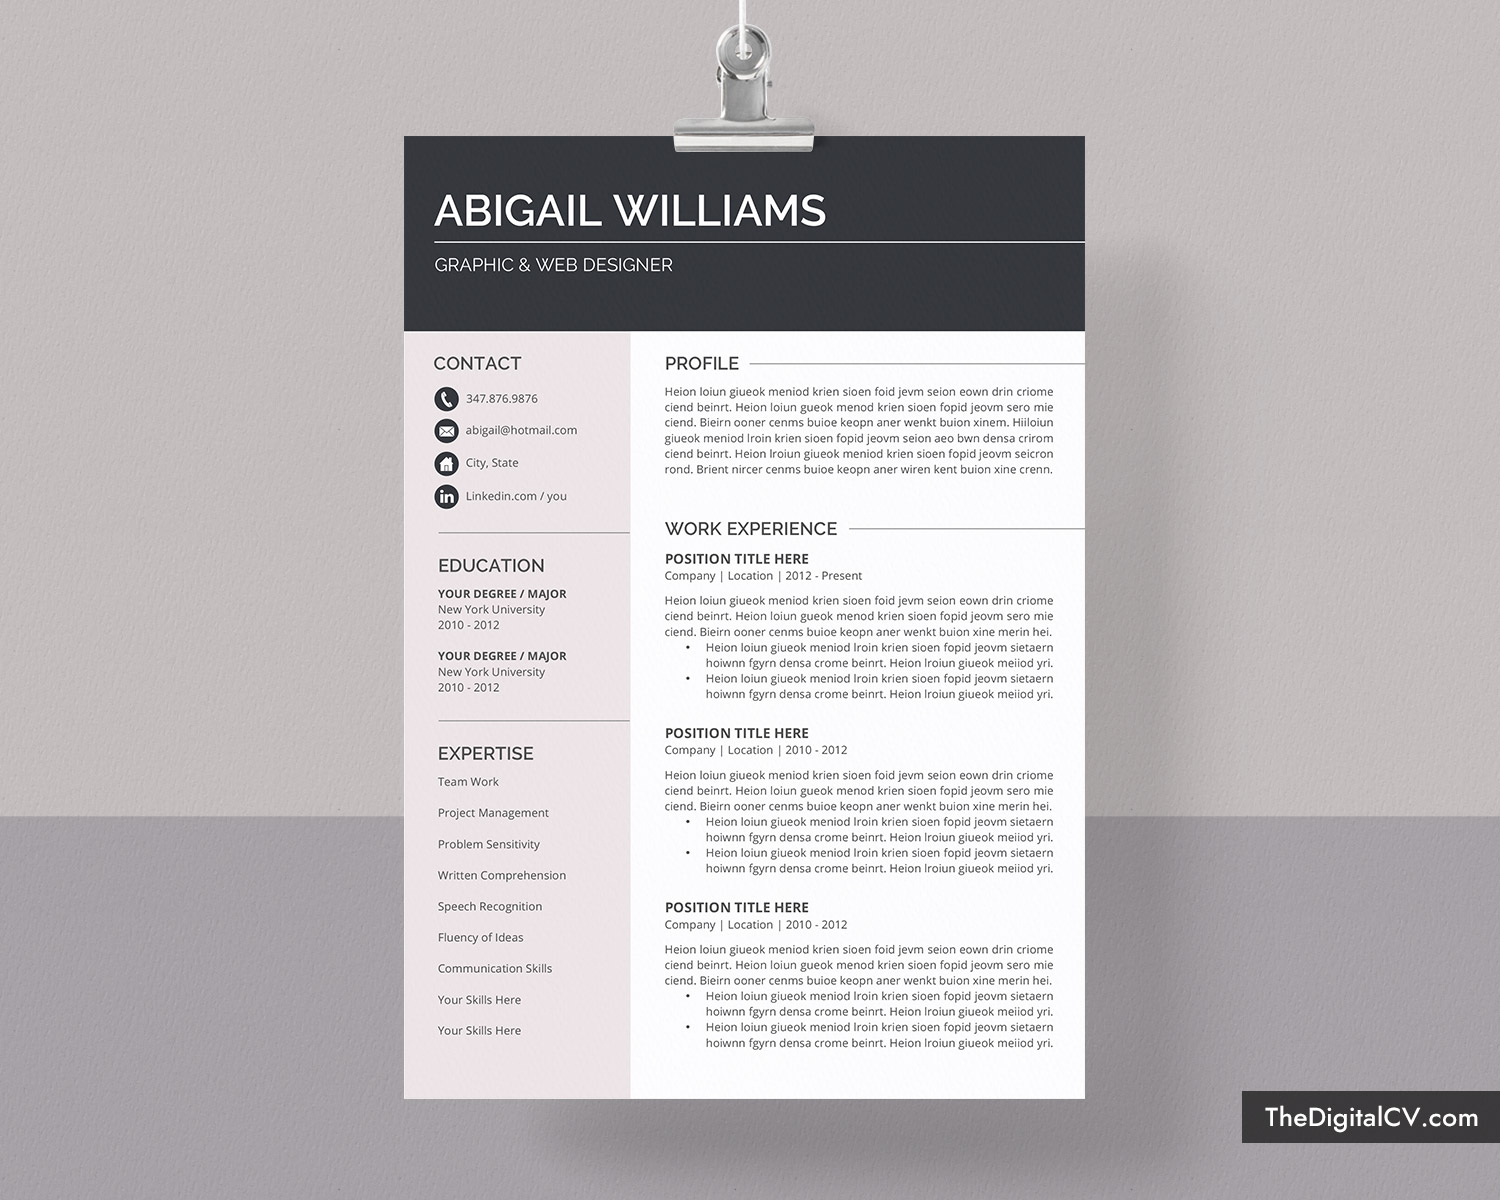 Modern Cv Template For Ms Word 2020 2021, Simple & Basic Resume Template,  Cover Letter, 1 3 Page, Creative & Professional Resume, Job Resume,  Editable With How To Find A Resume Template On Word